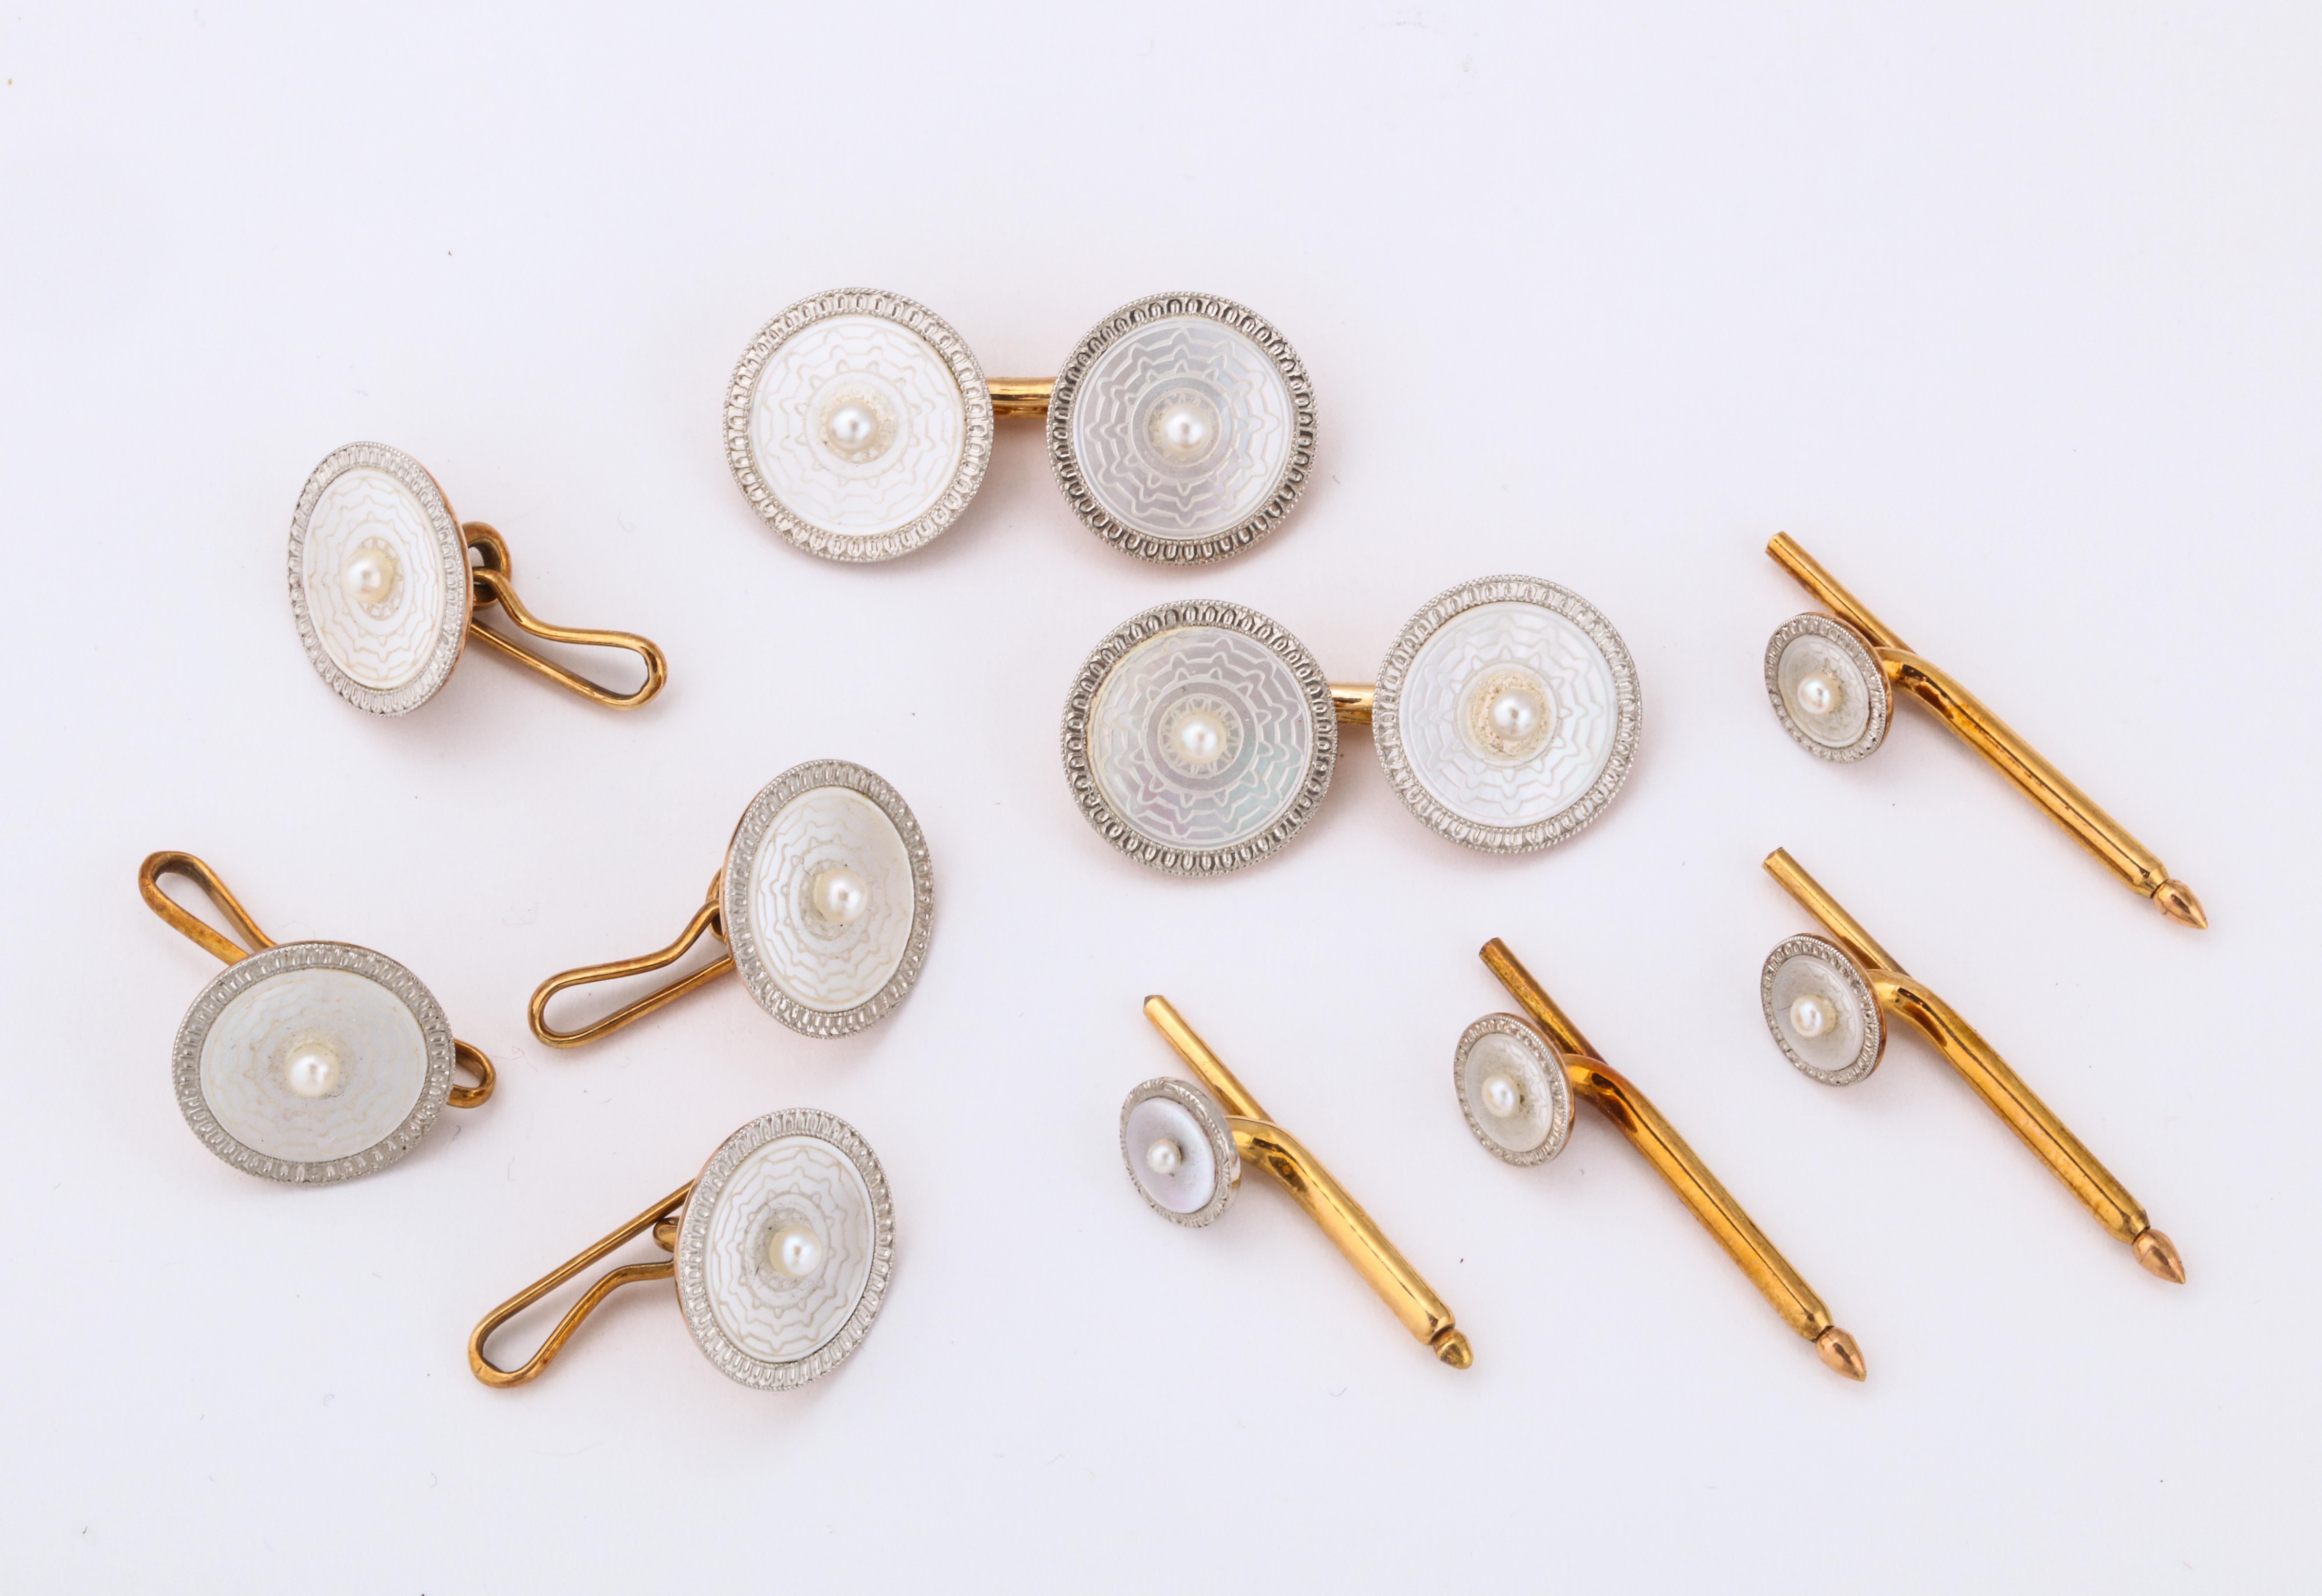 Mother of pearl, seed pearl, diamond cuff link set.

Set in gold and platinum

Made circa 1920